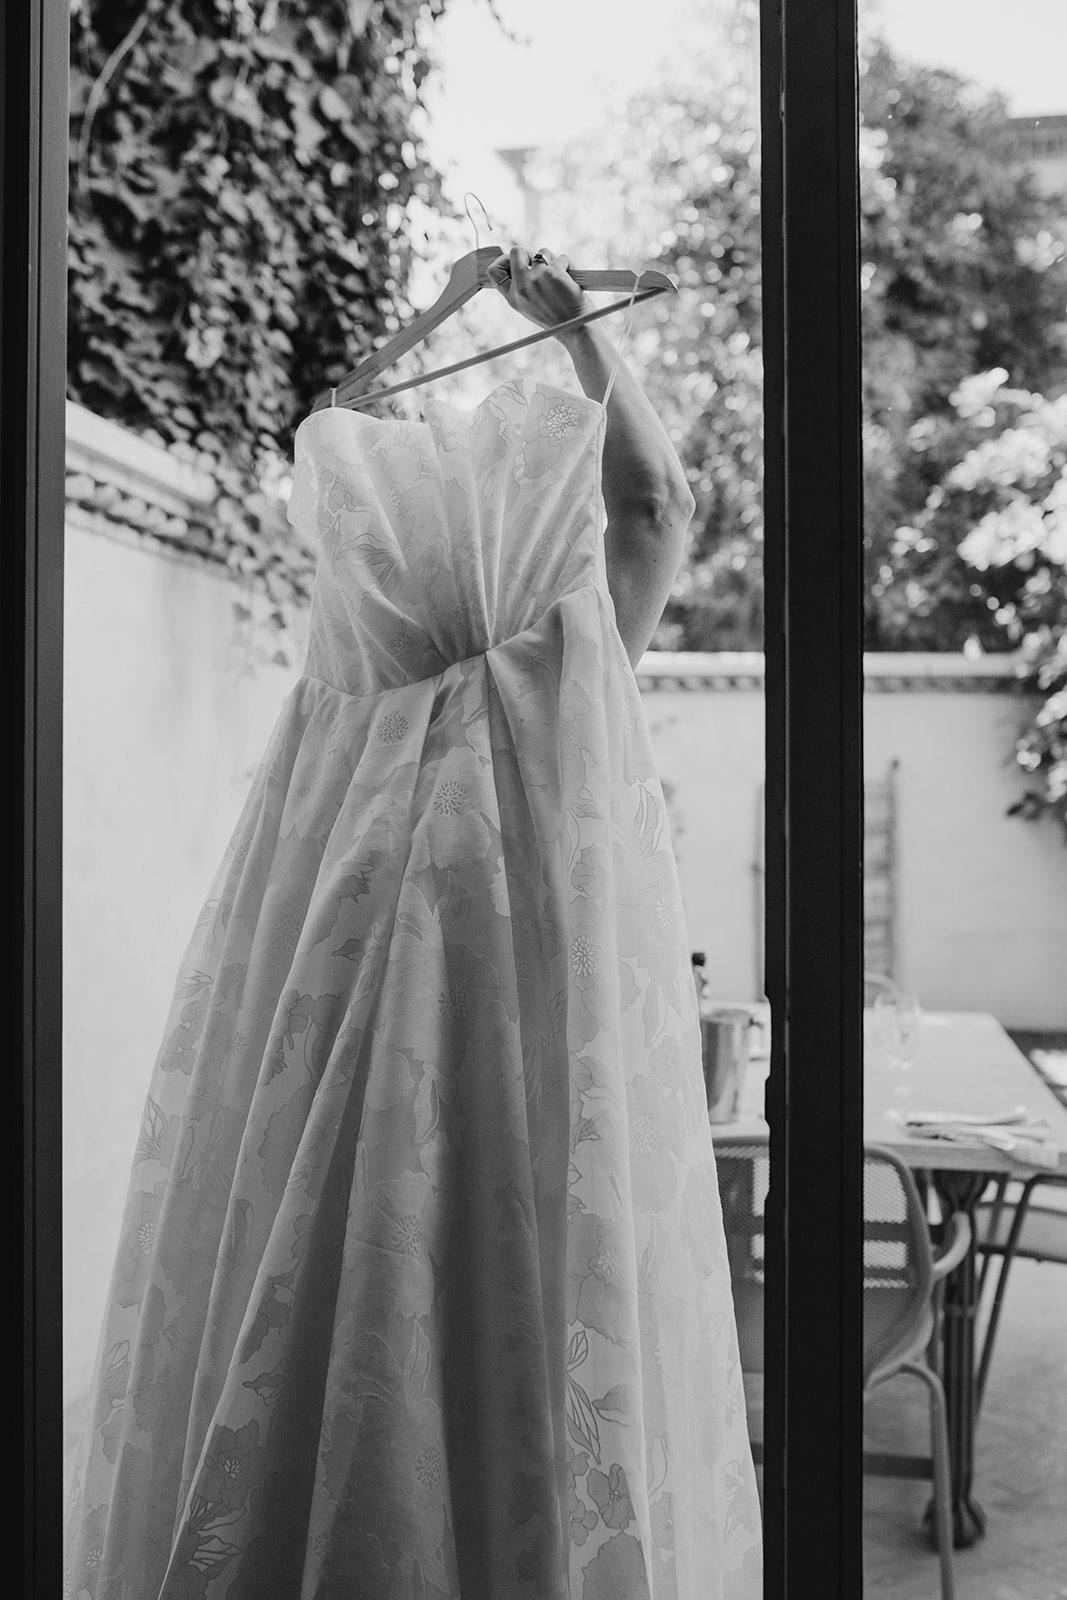 Bride carries her dress to gardens of Les Deux Tour during her elopement in Marrakech